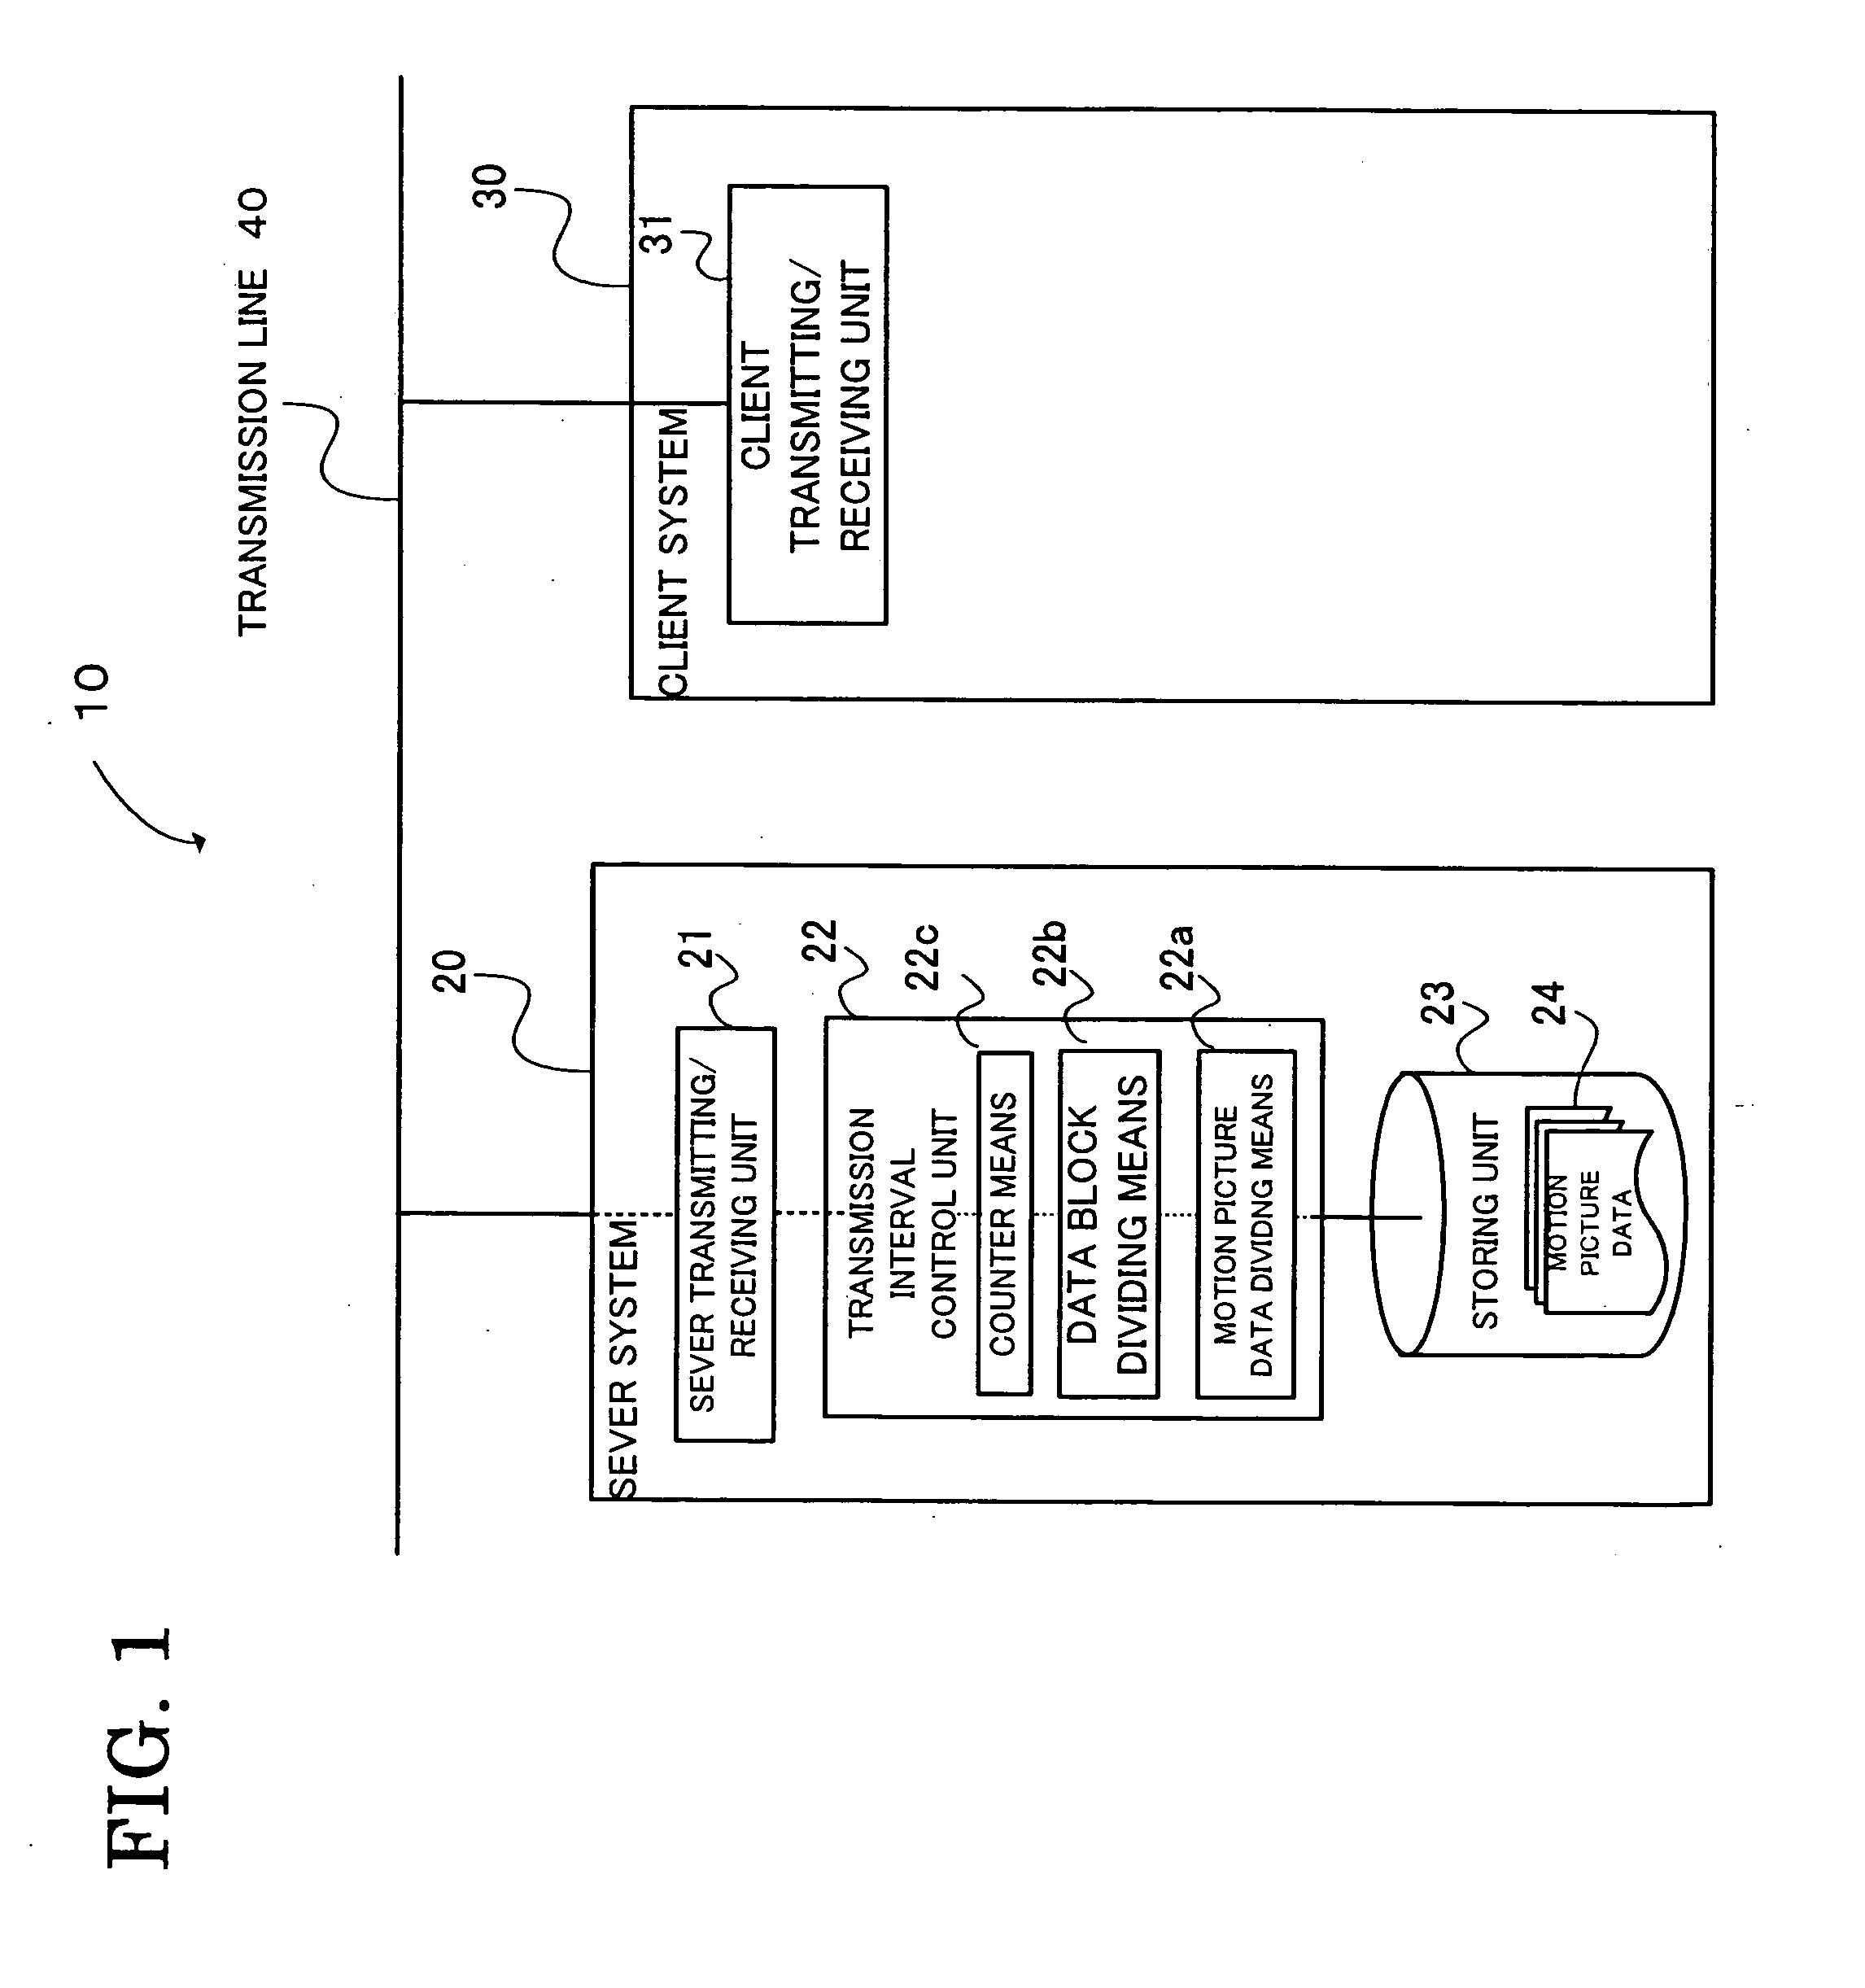 Motion picture data transmission method and system